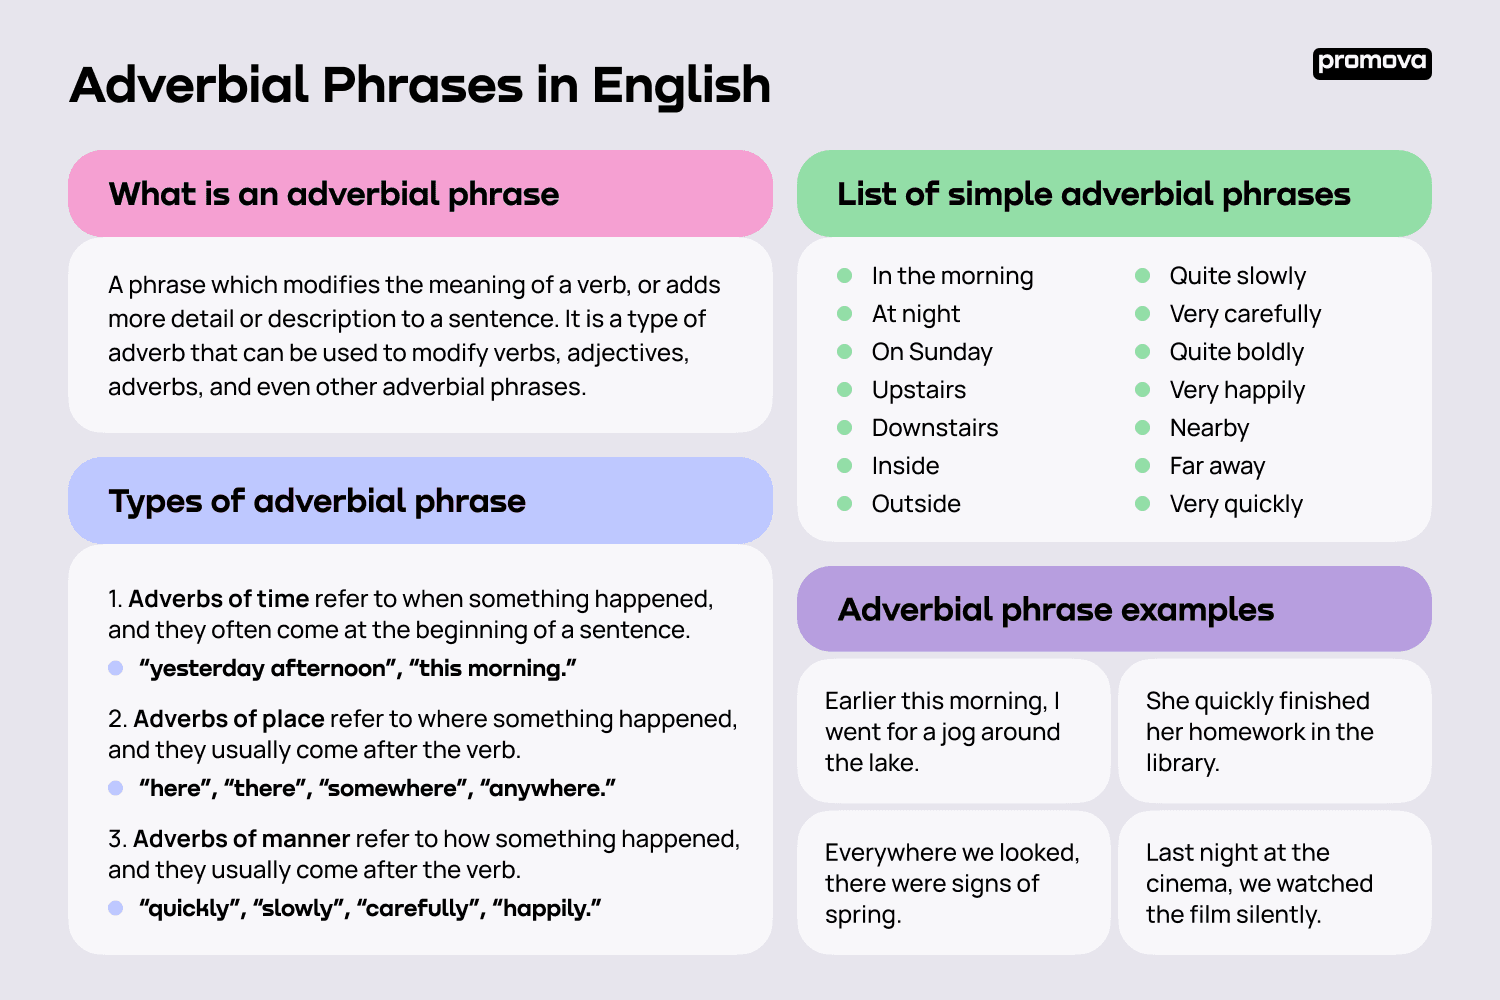 List of simple adverbial phrases